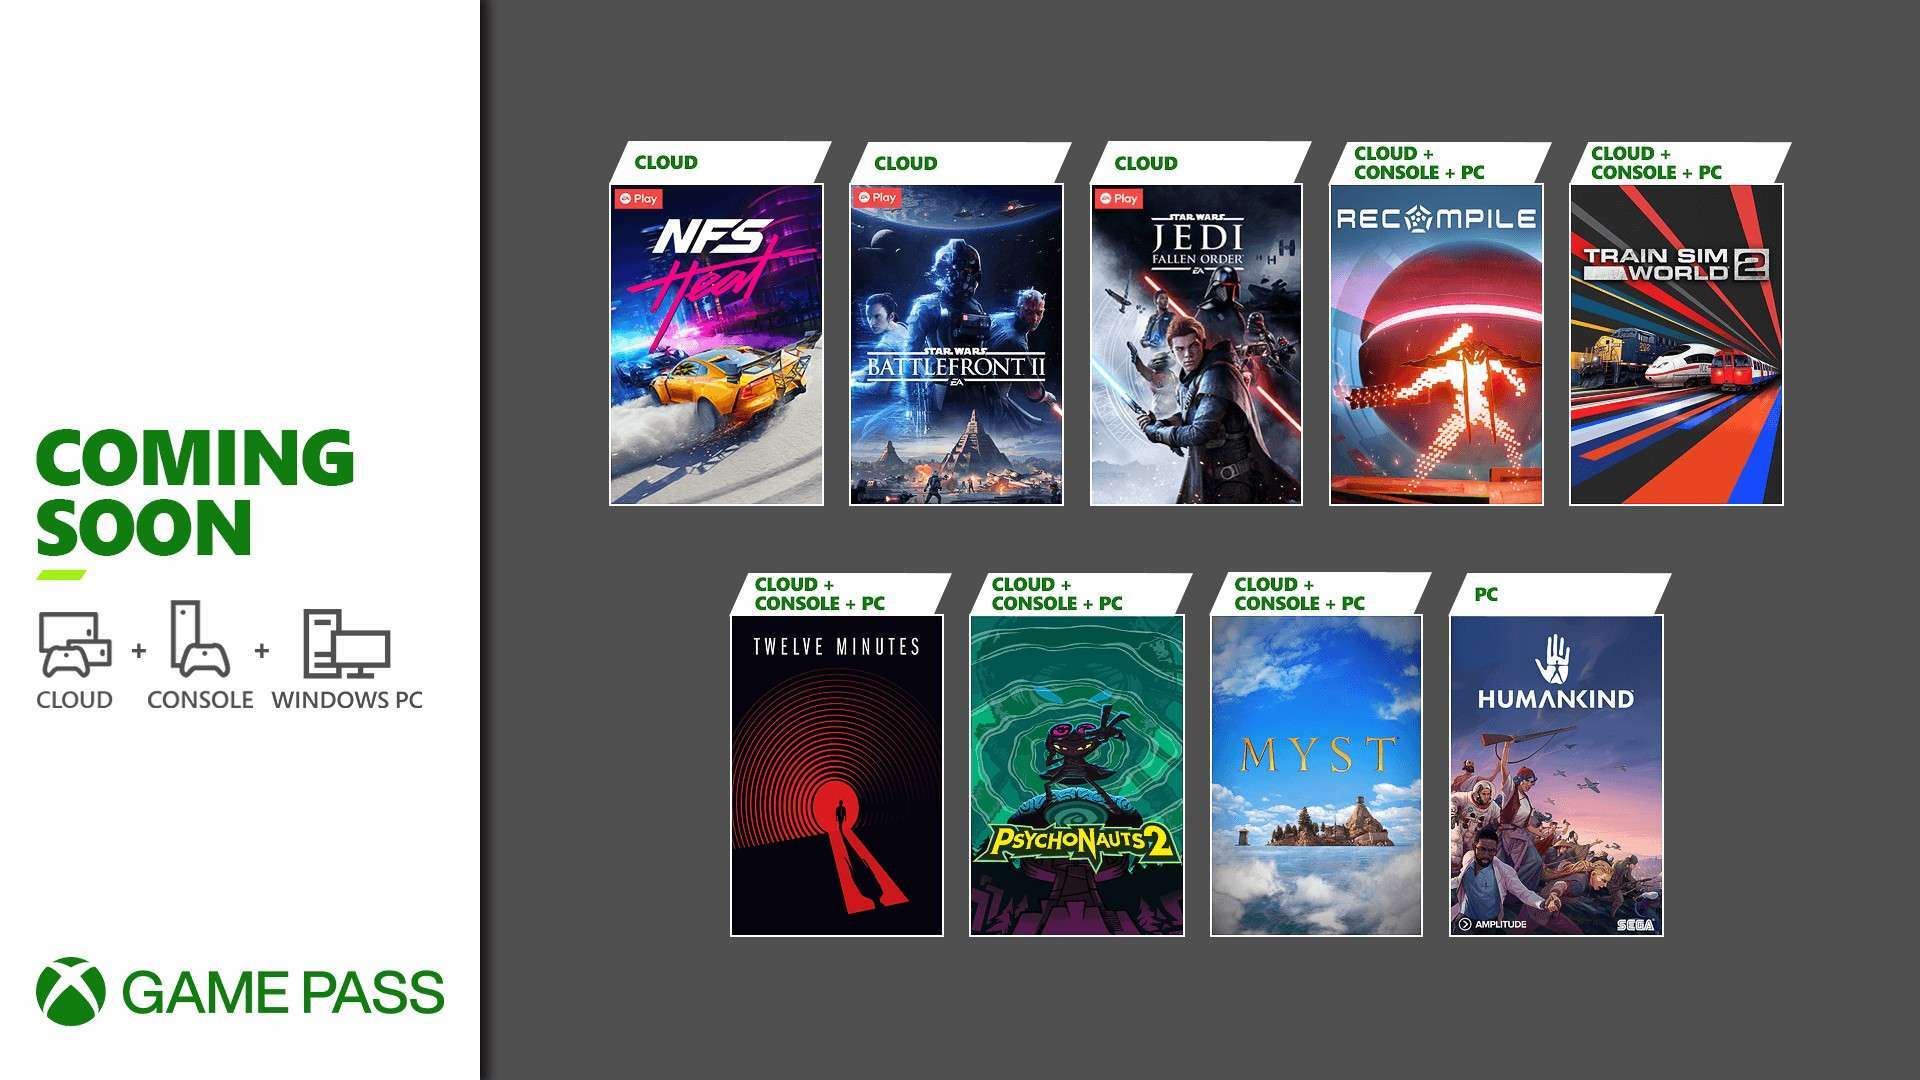 Verlaten levering Persoonlijk Xbox Game Pass August 2021: All The Games Coming To The Service - GameSpot